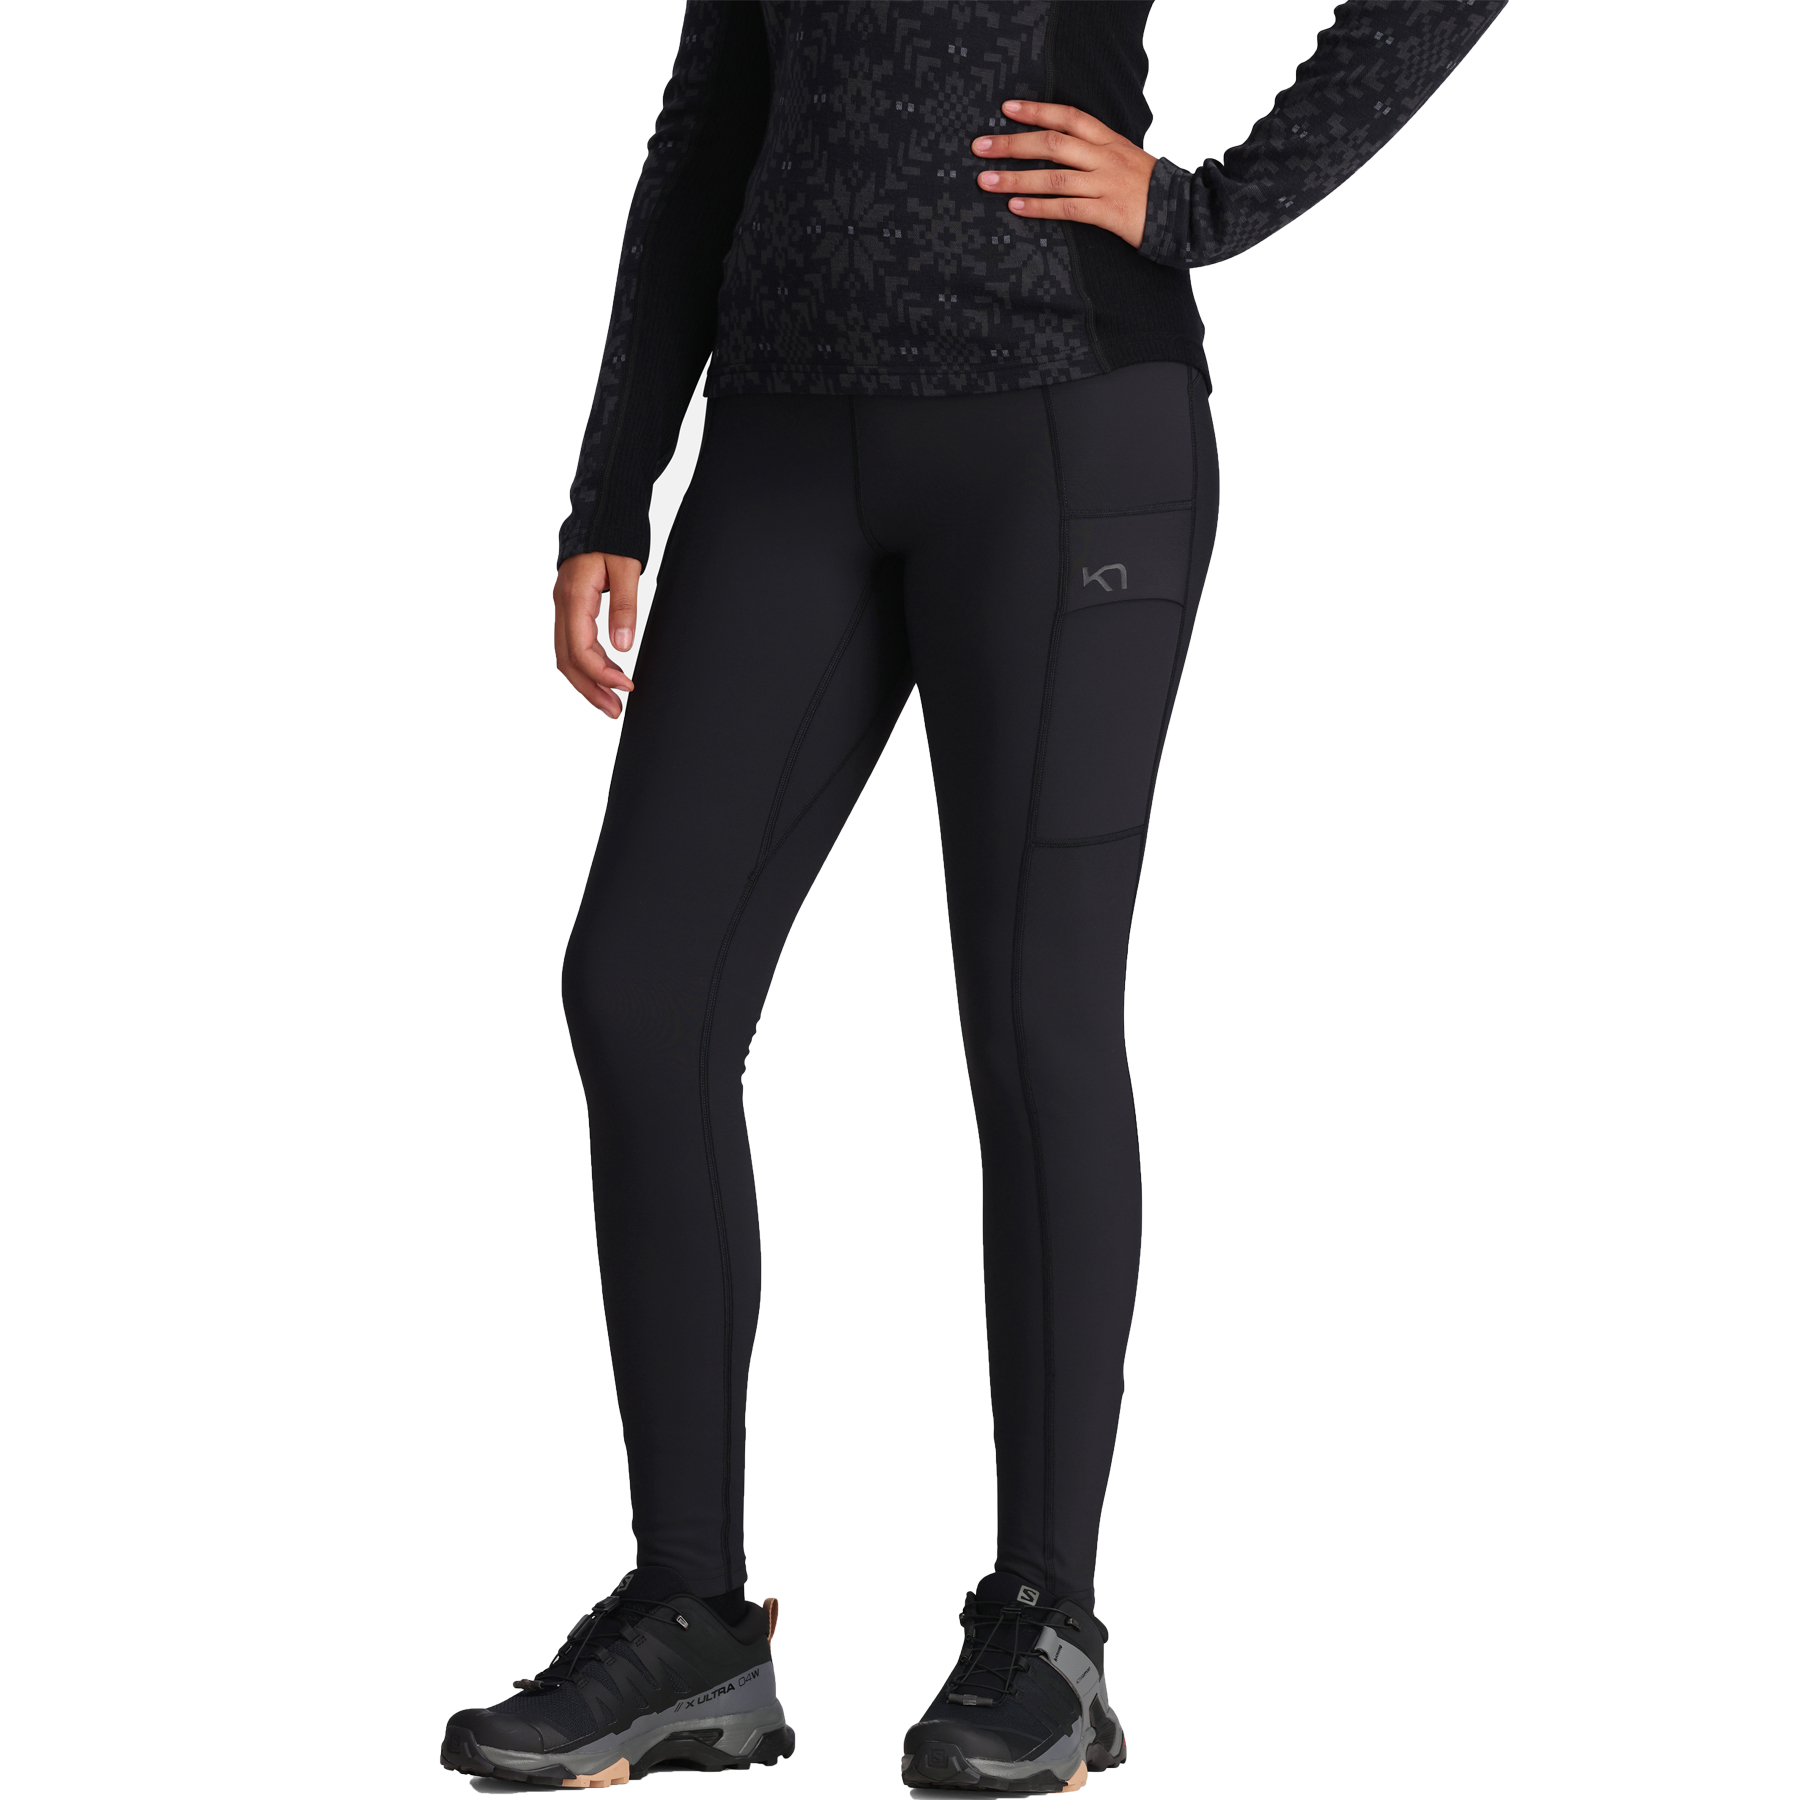 Picture of Kari Traa Ruth Thermal Tights Women - black